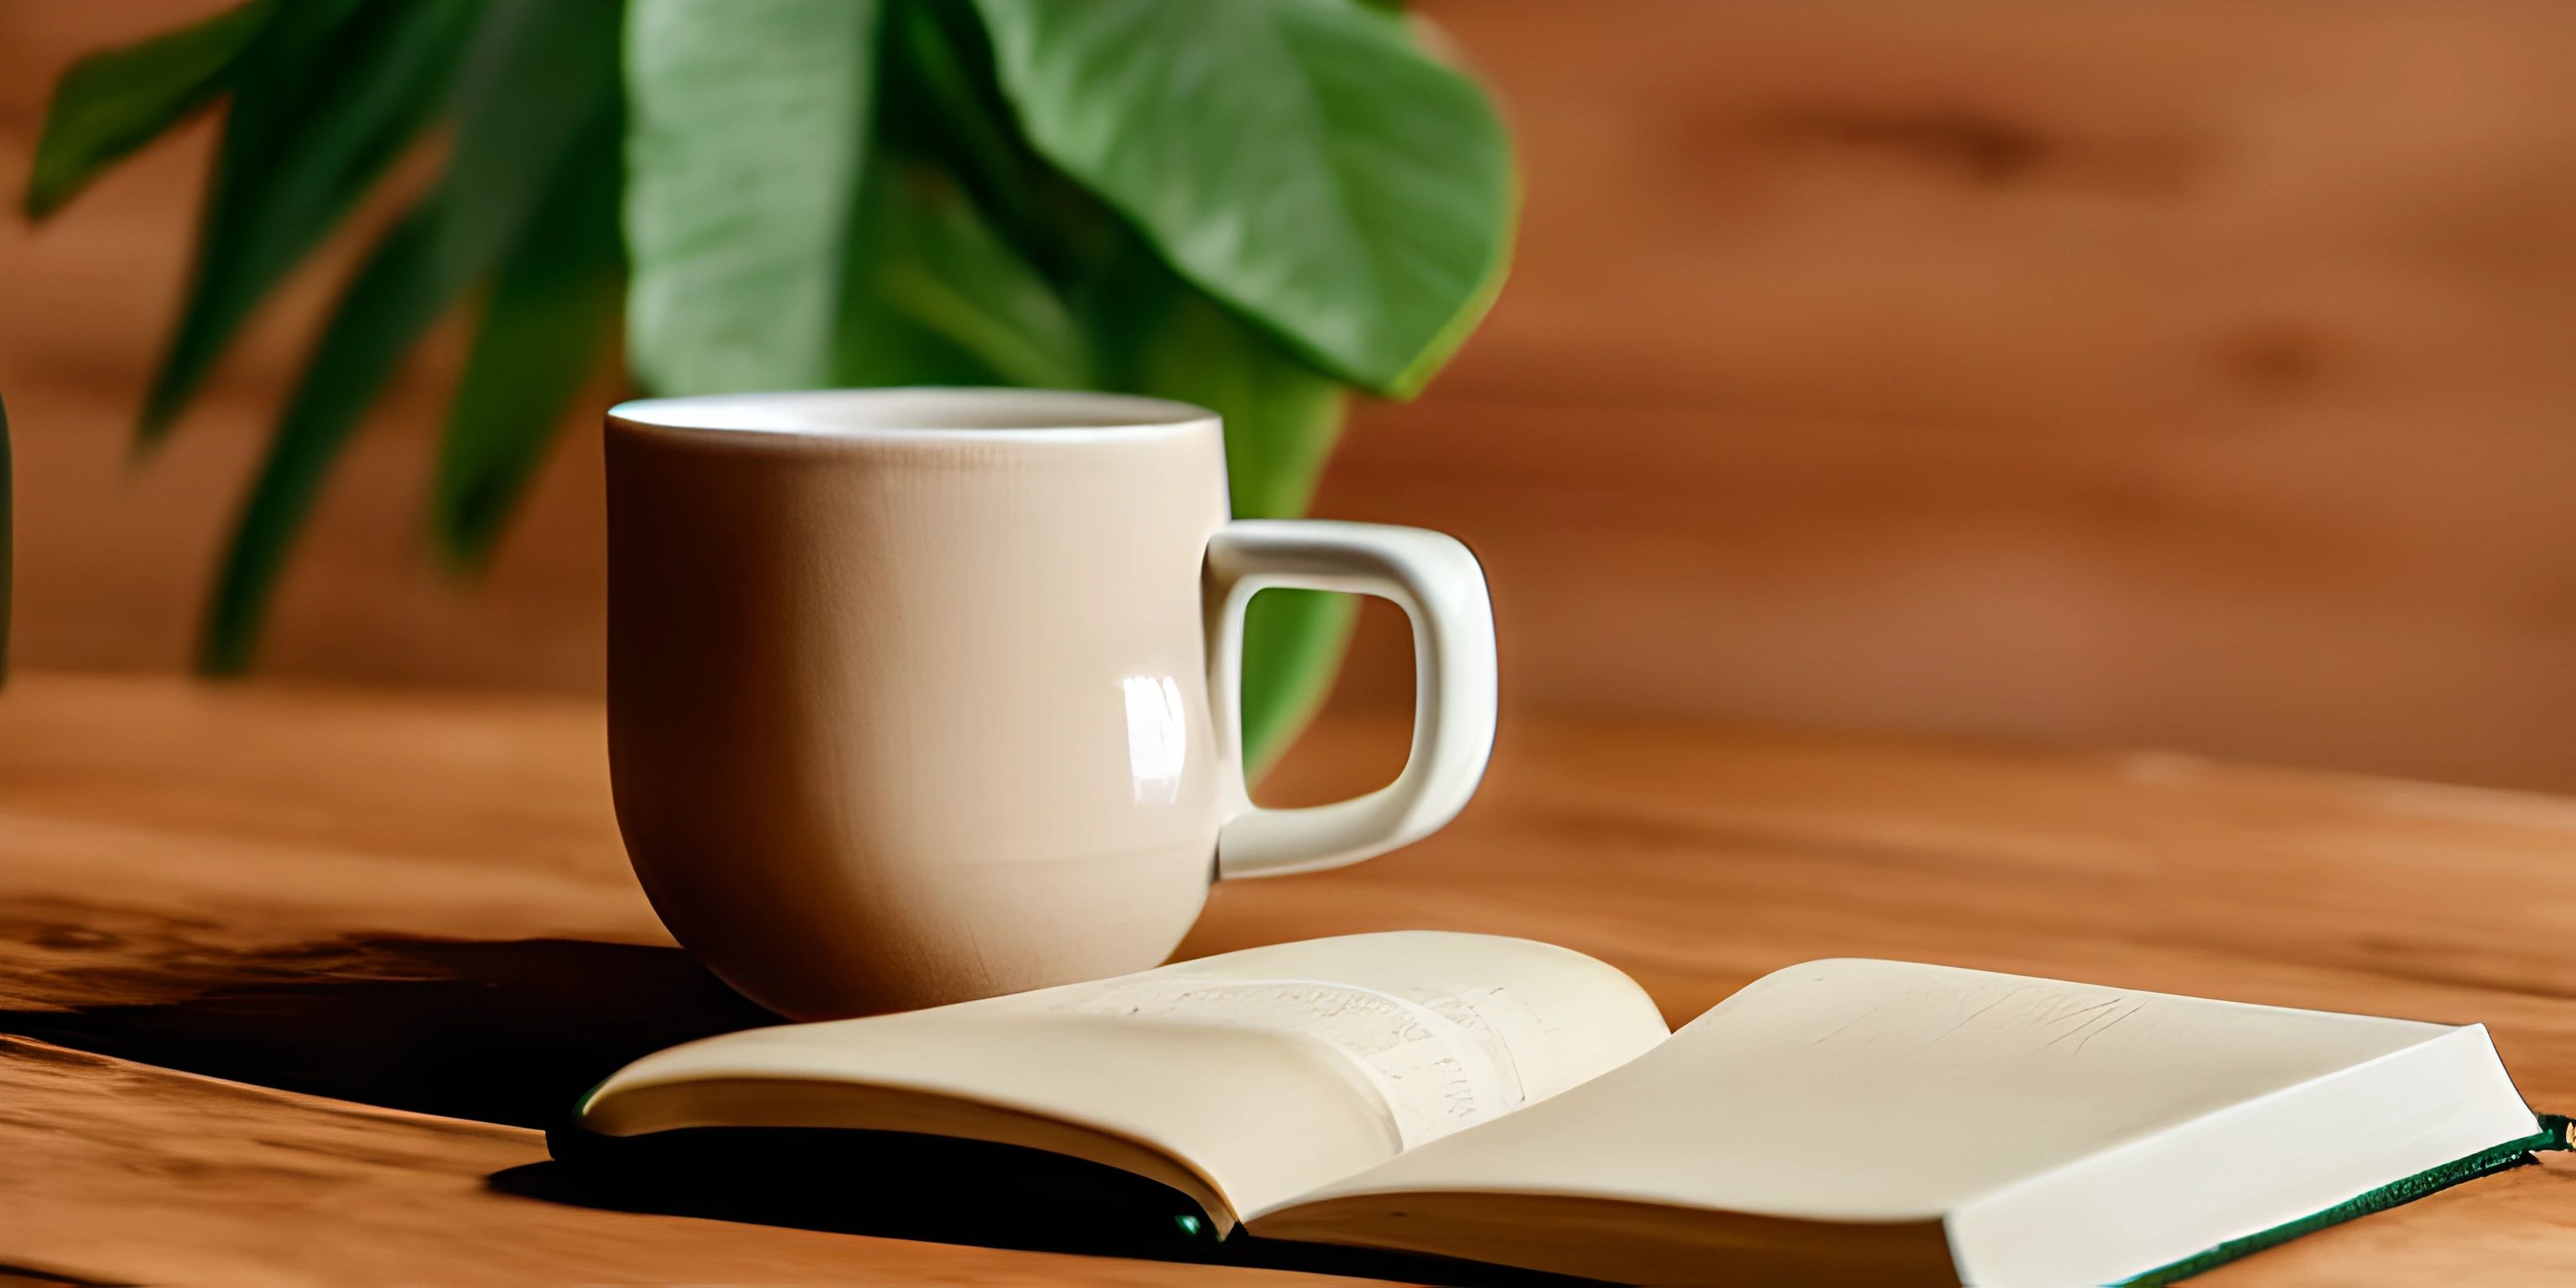 the table is holding an open book, and a cup of coffee is beside it